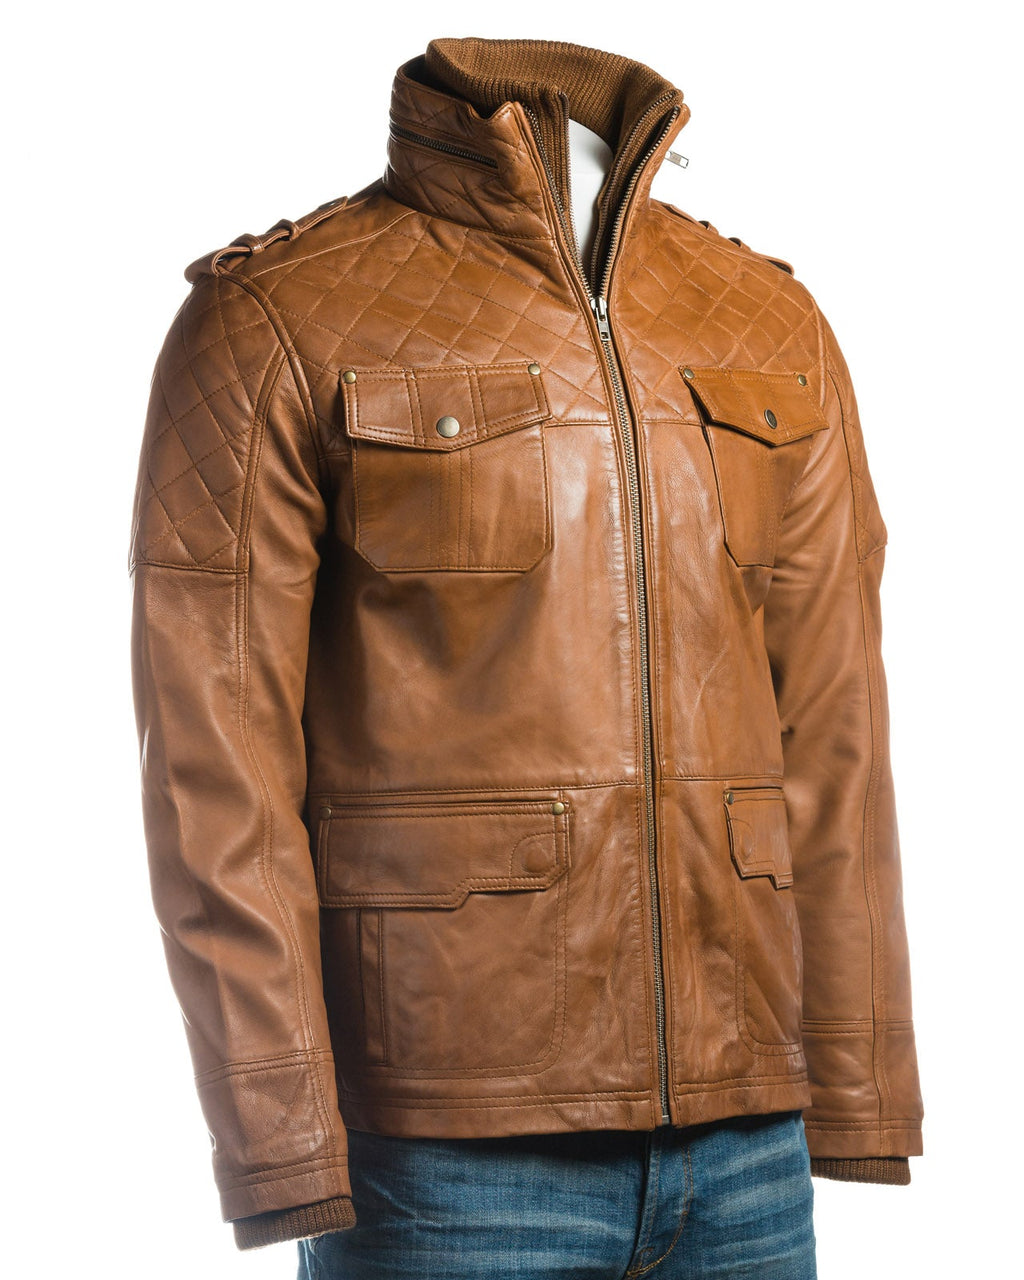 Men's Cognac Mid Length Leather Jacket With Double Collar Shoulder Stitch Detail: Orlando